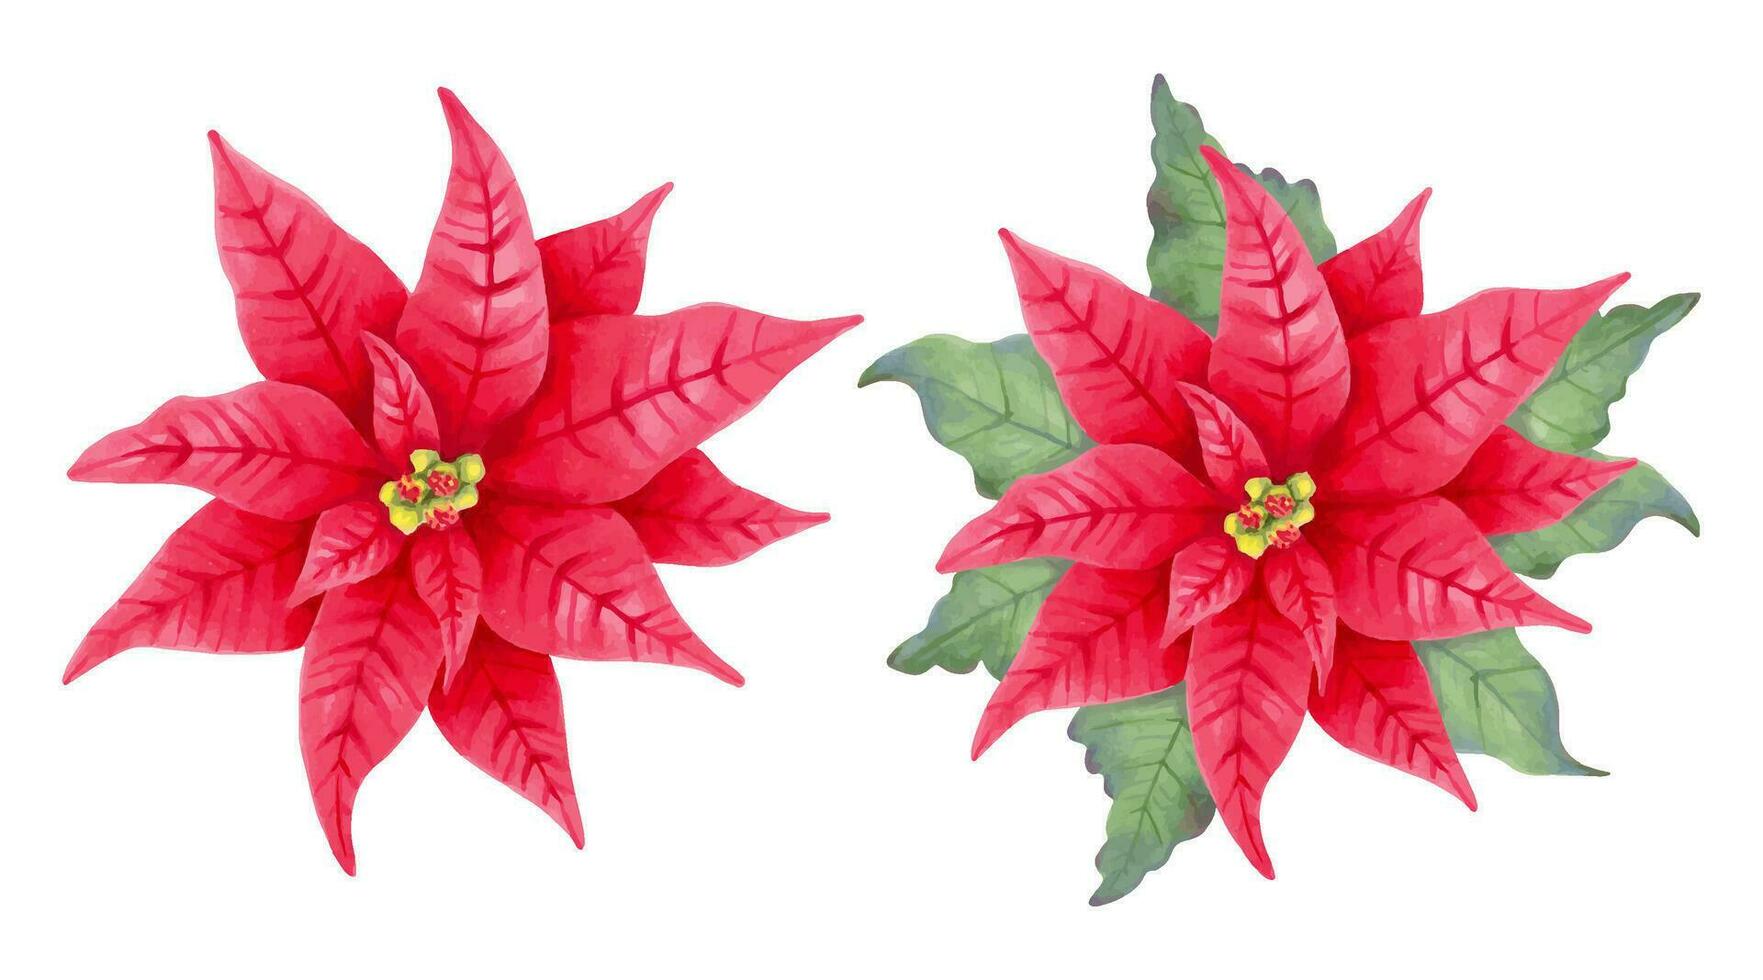 Christmas star poinsettia flower with and without leaves.Flower clipart. Festive decoration for design for Christmas and New Year. Marker in watercolor style illustration. Hand-drawn isolated art vector